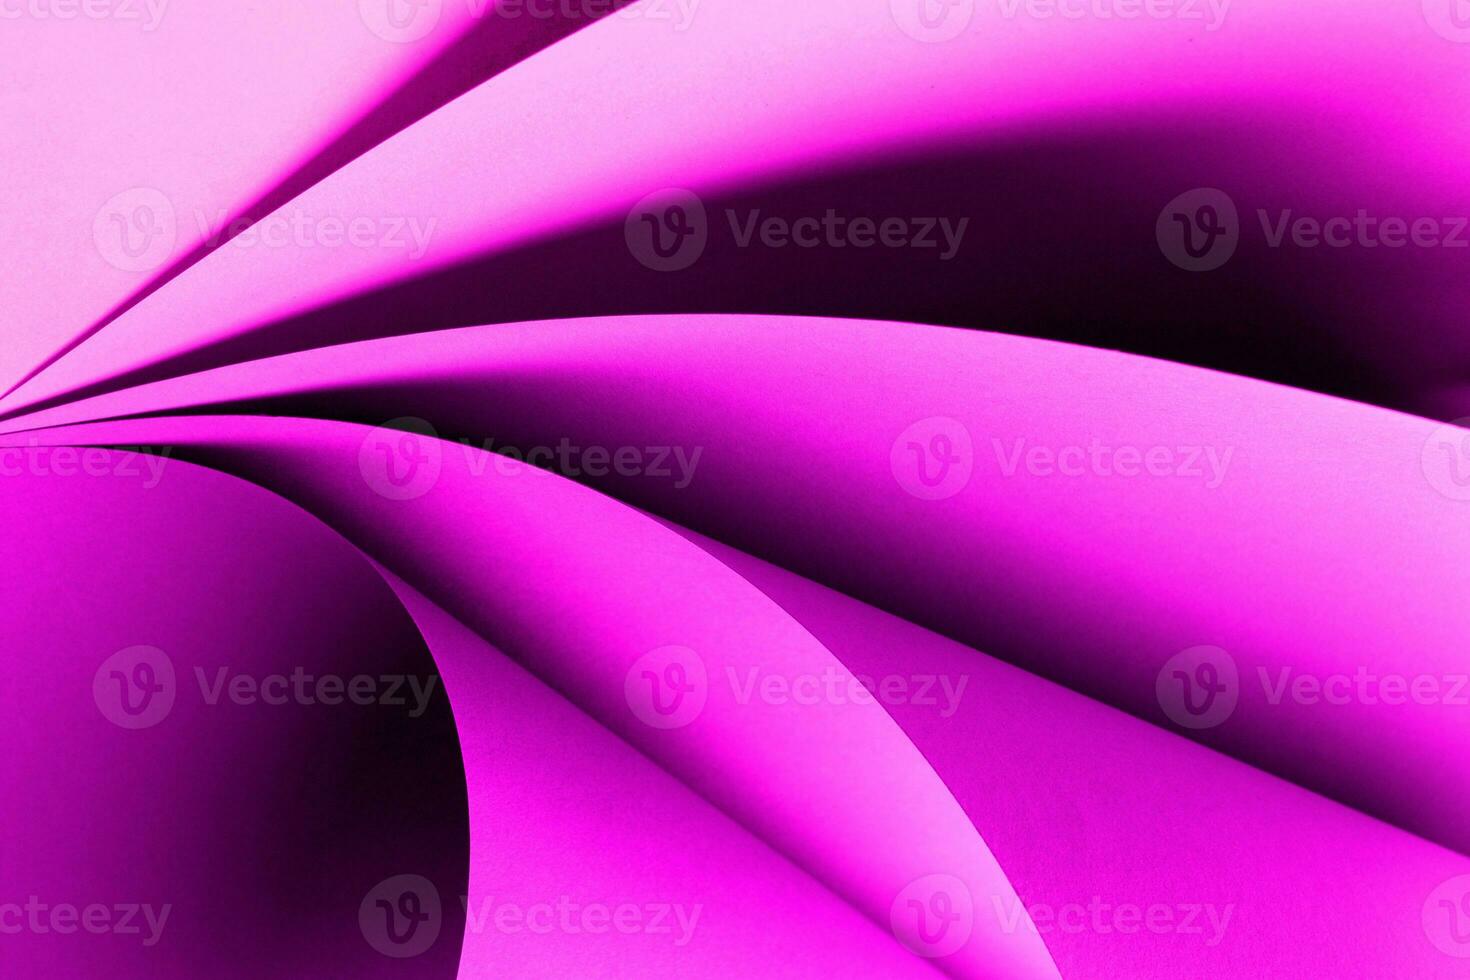 Abstract paper curved background photo